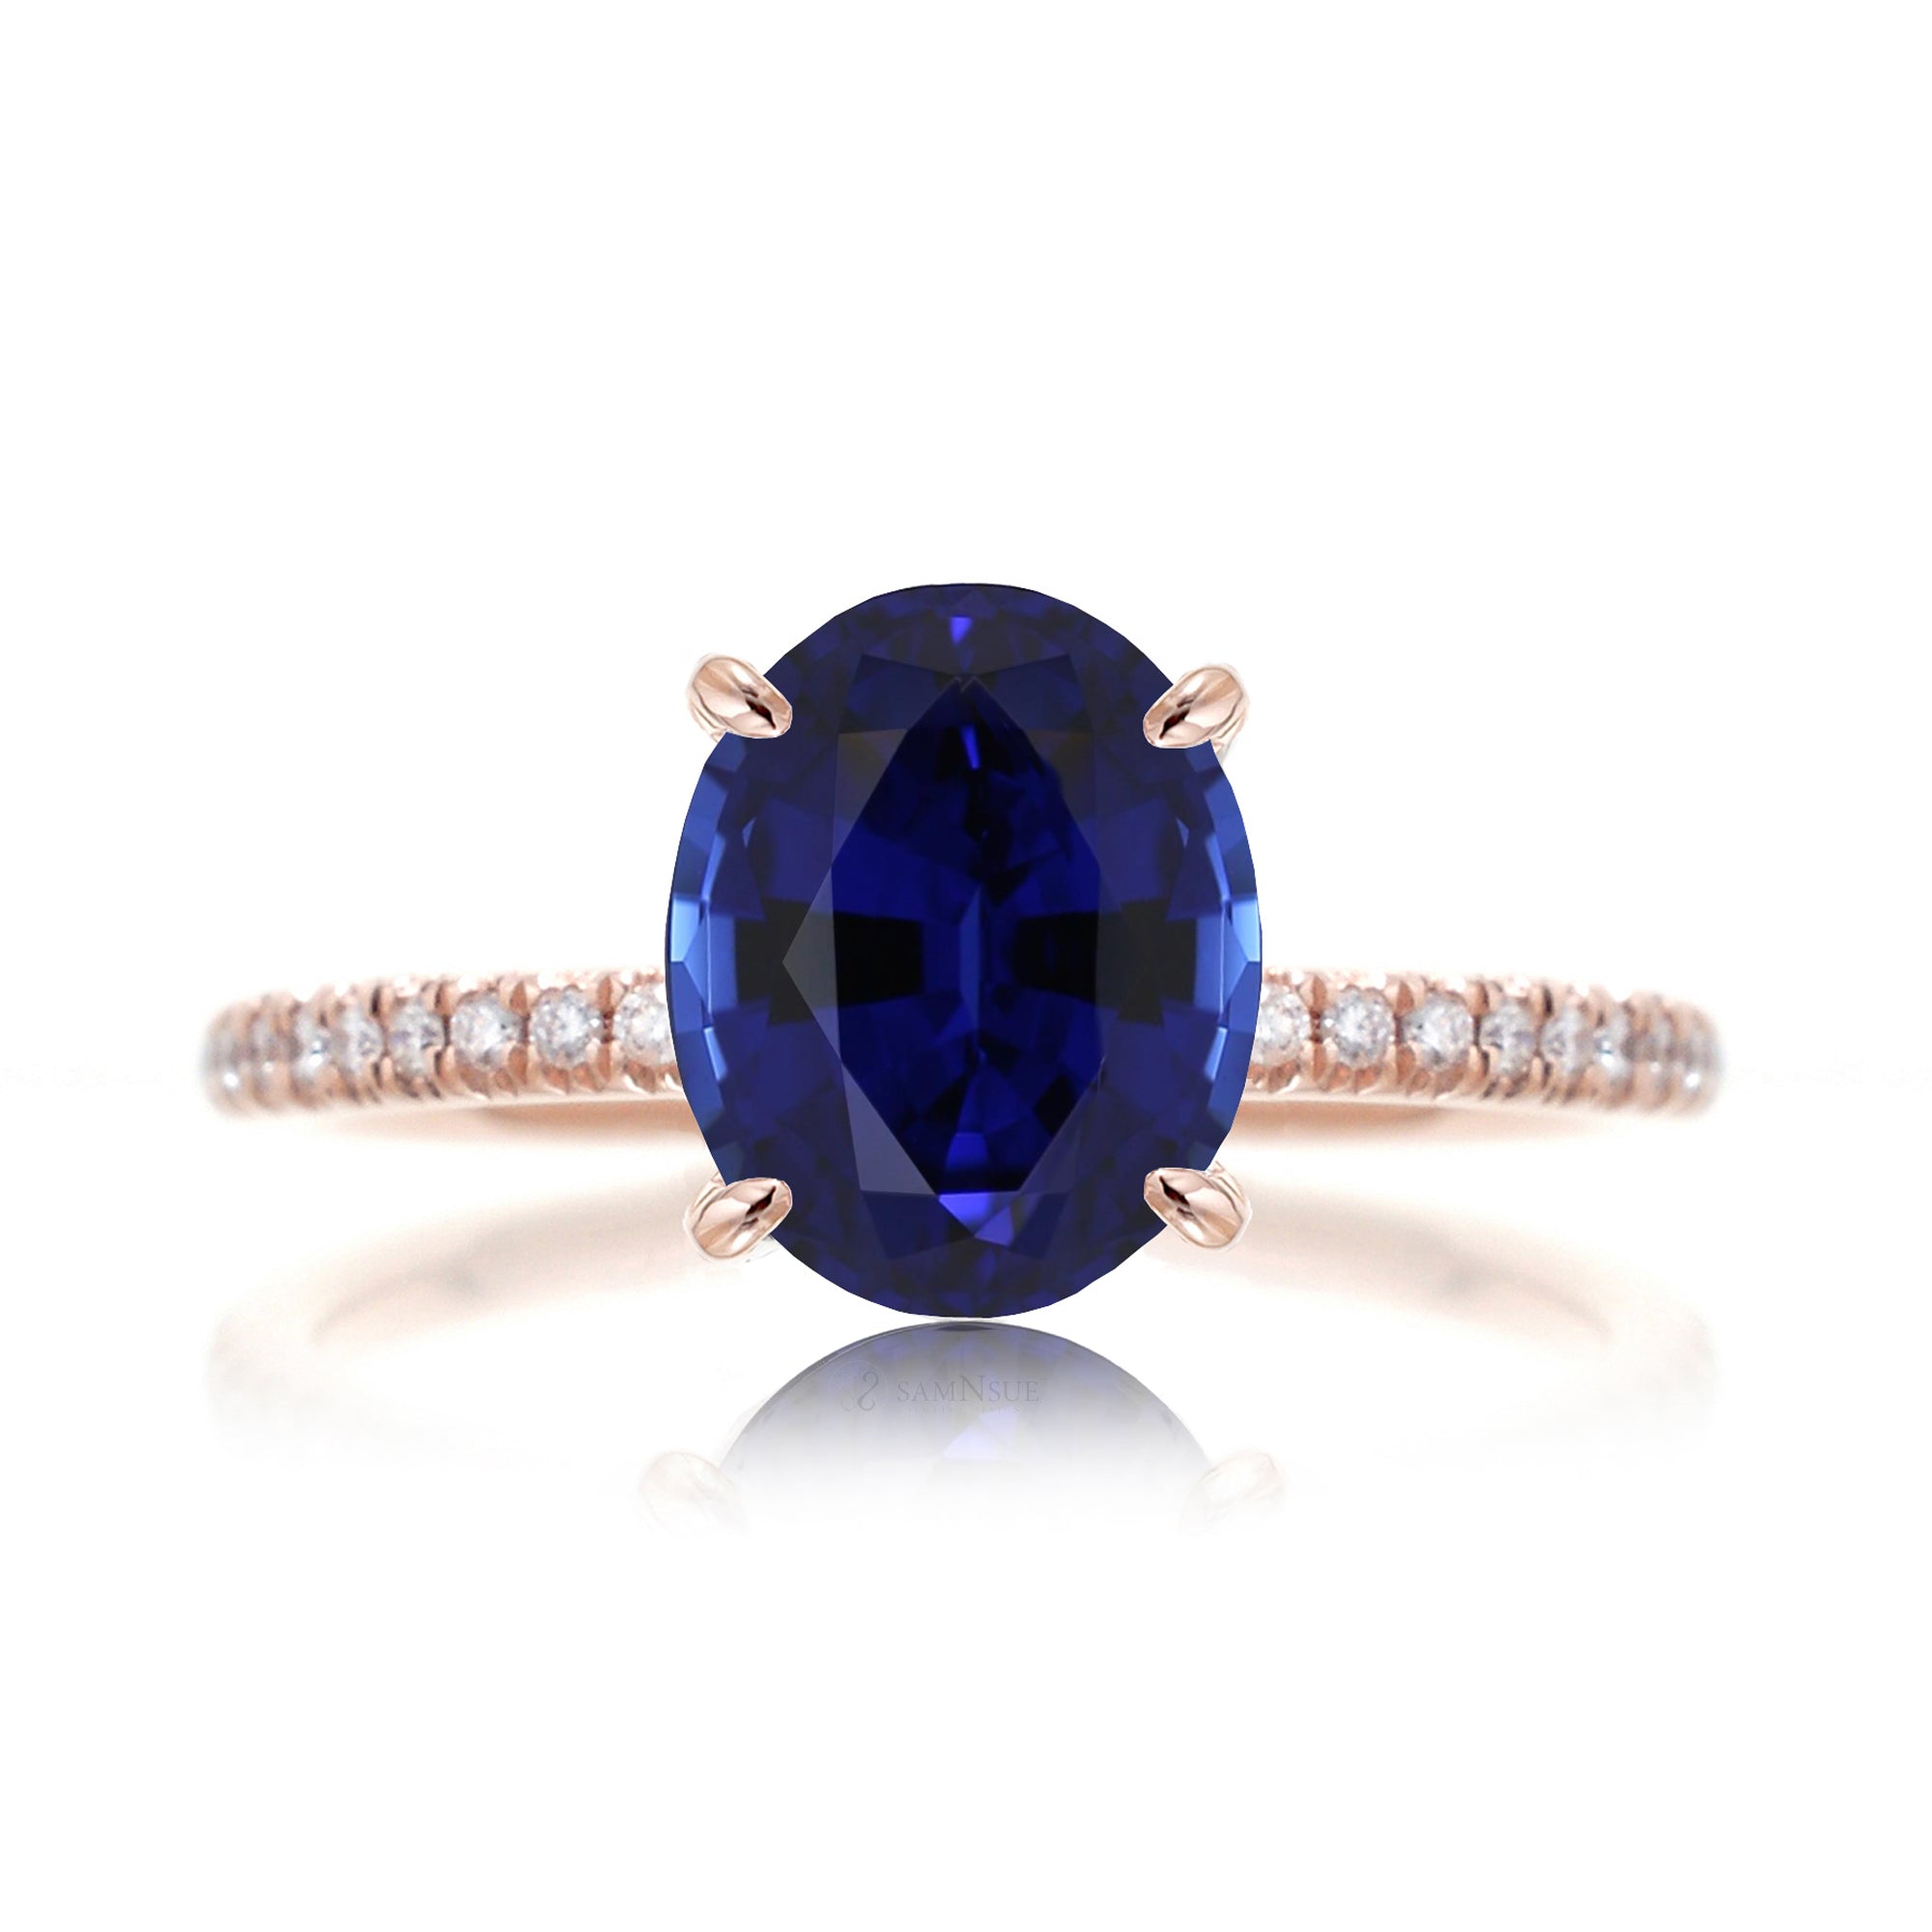 Oval blue sapphire diamond band engagement ring rose gold - the Ava